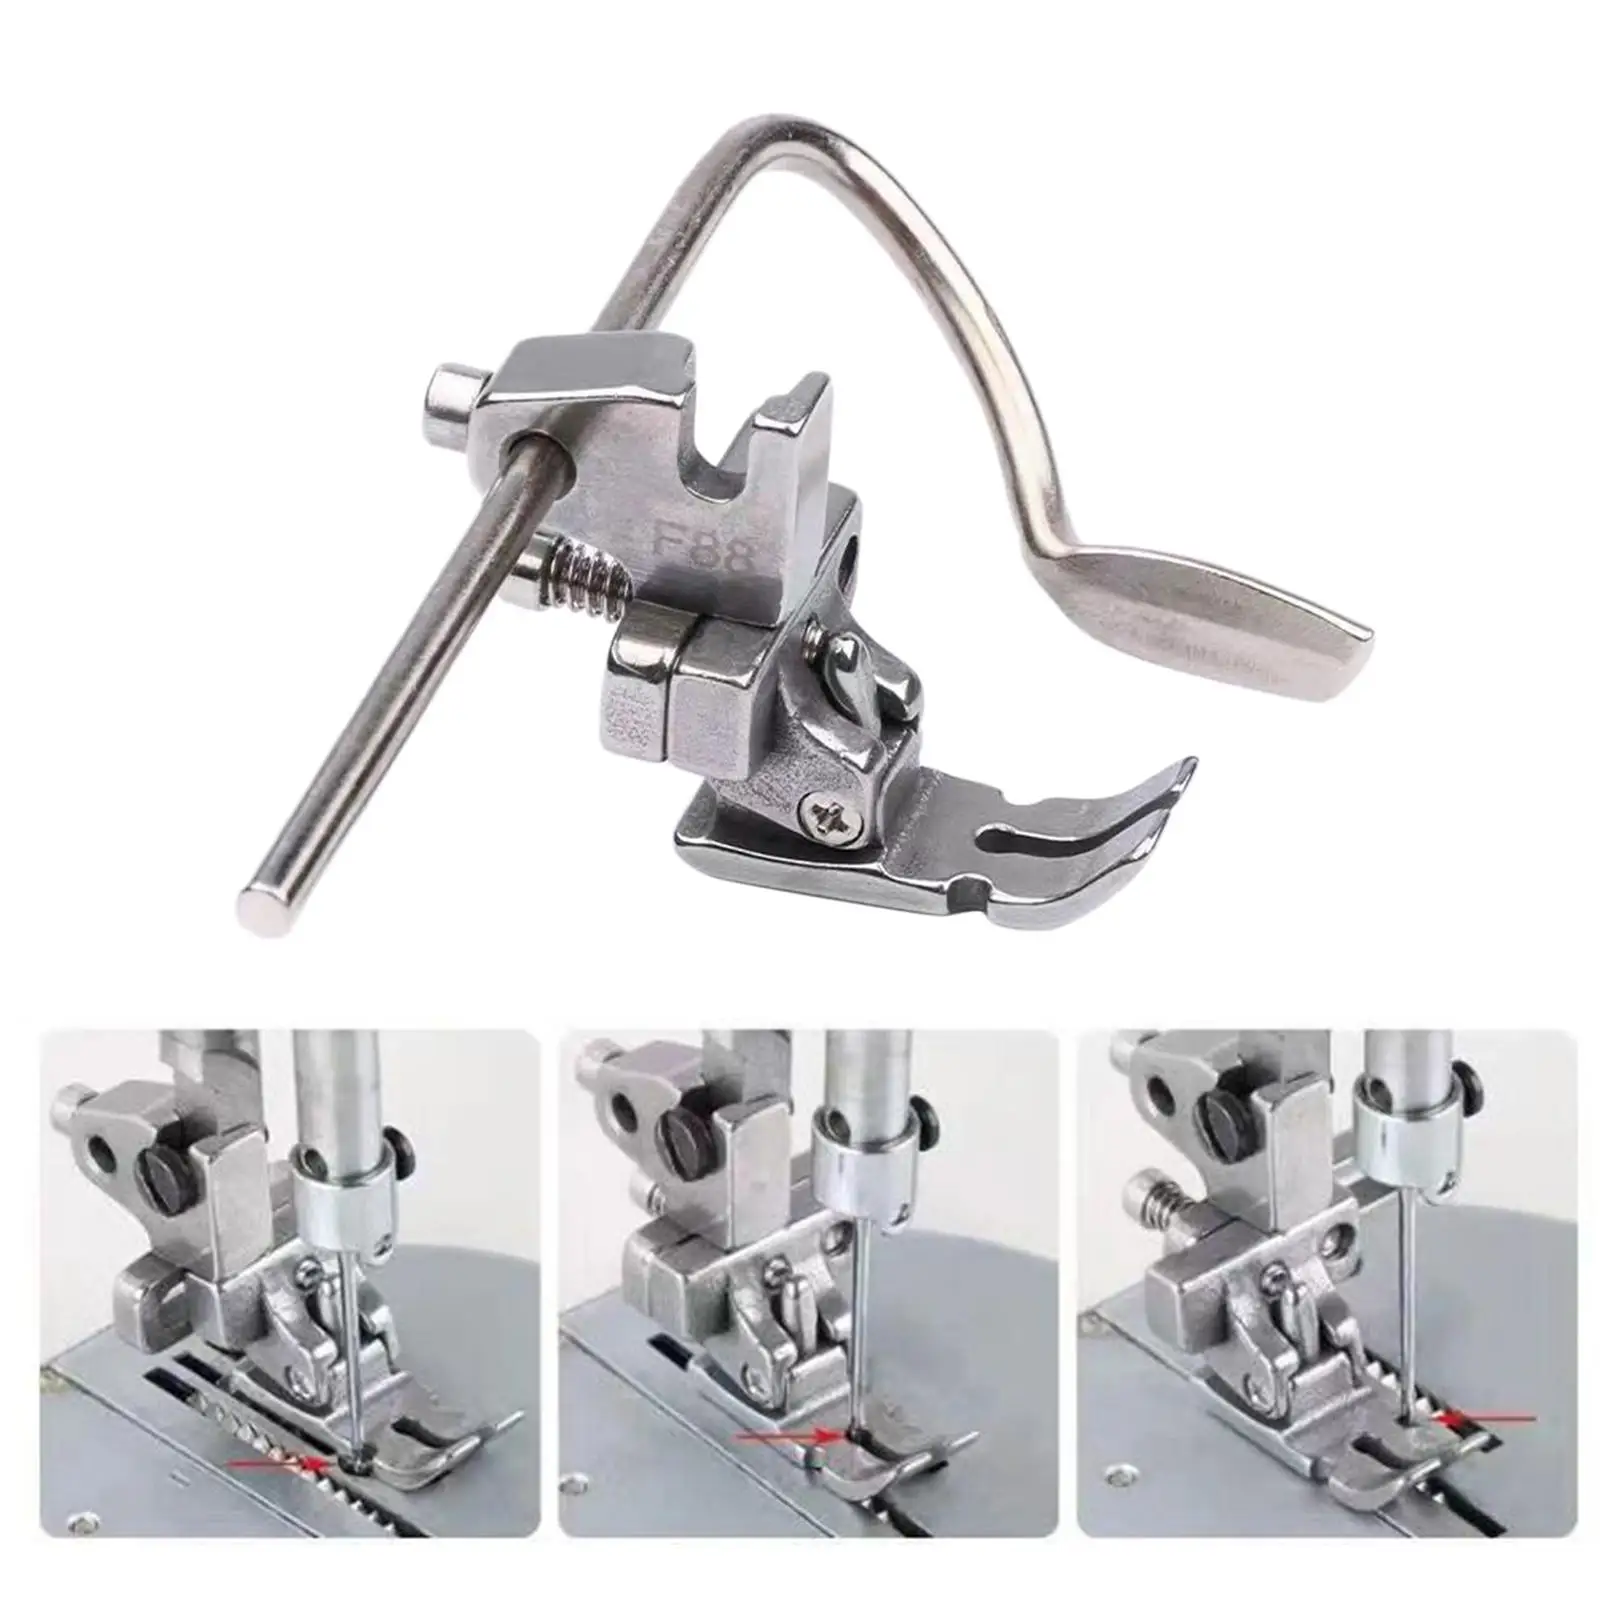 Presser Foot for Sewing Machine Quilting Patchwork Presser Foot for DIY Arts Crafts Embroidery Machine Clothes Leather Crafts